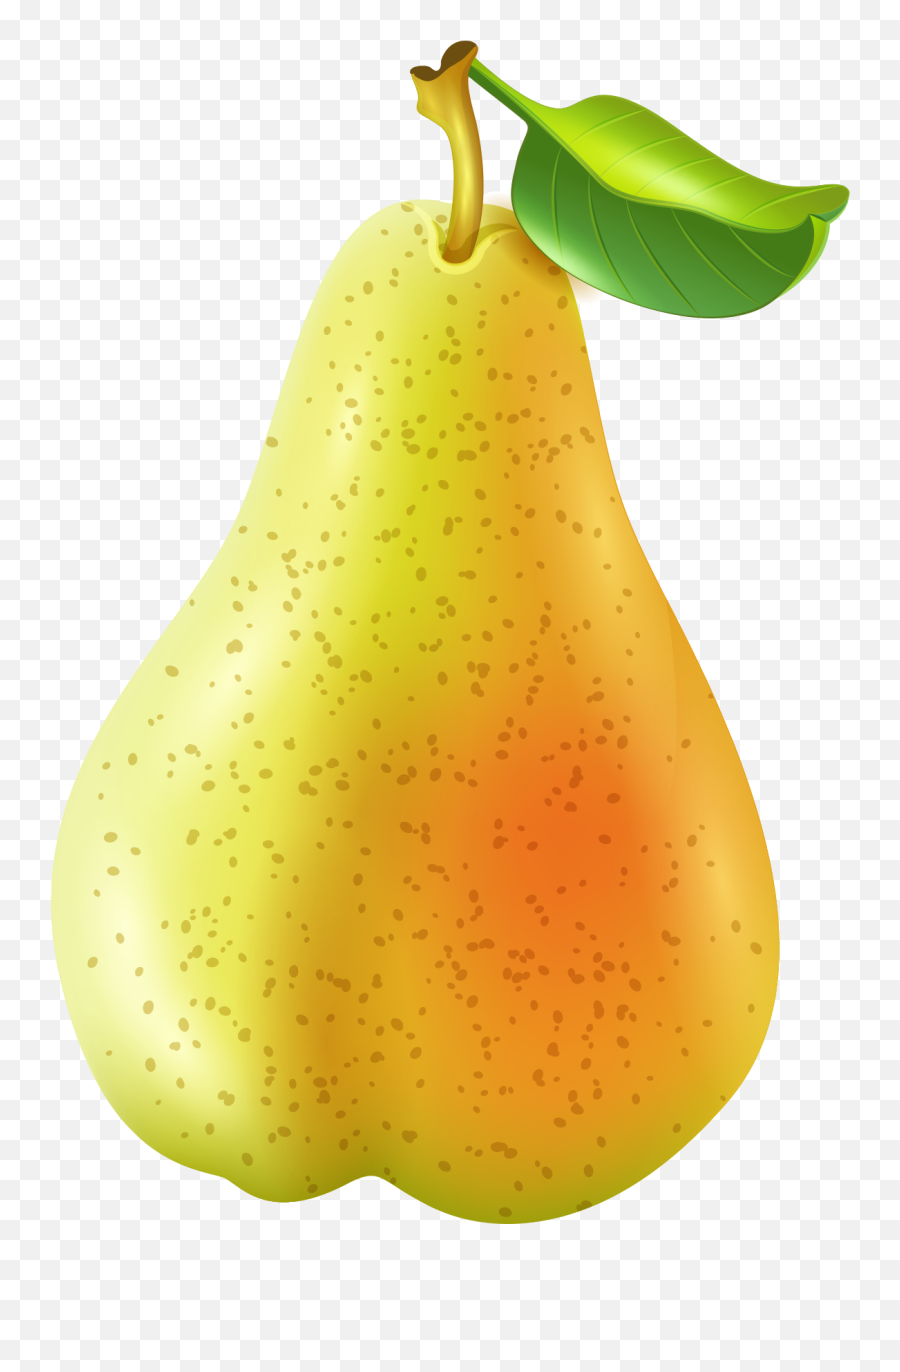 Guava Png Image Free Download Searchpng - Matoke,Guava Png